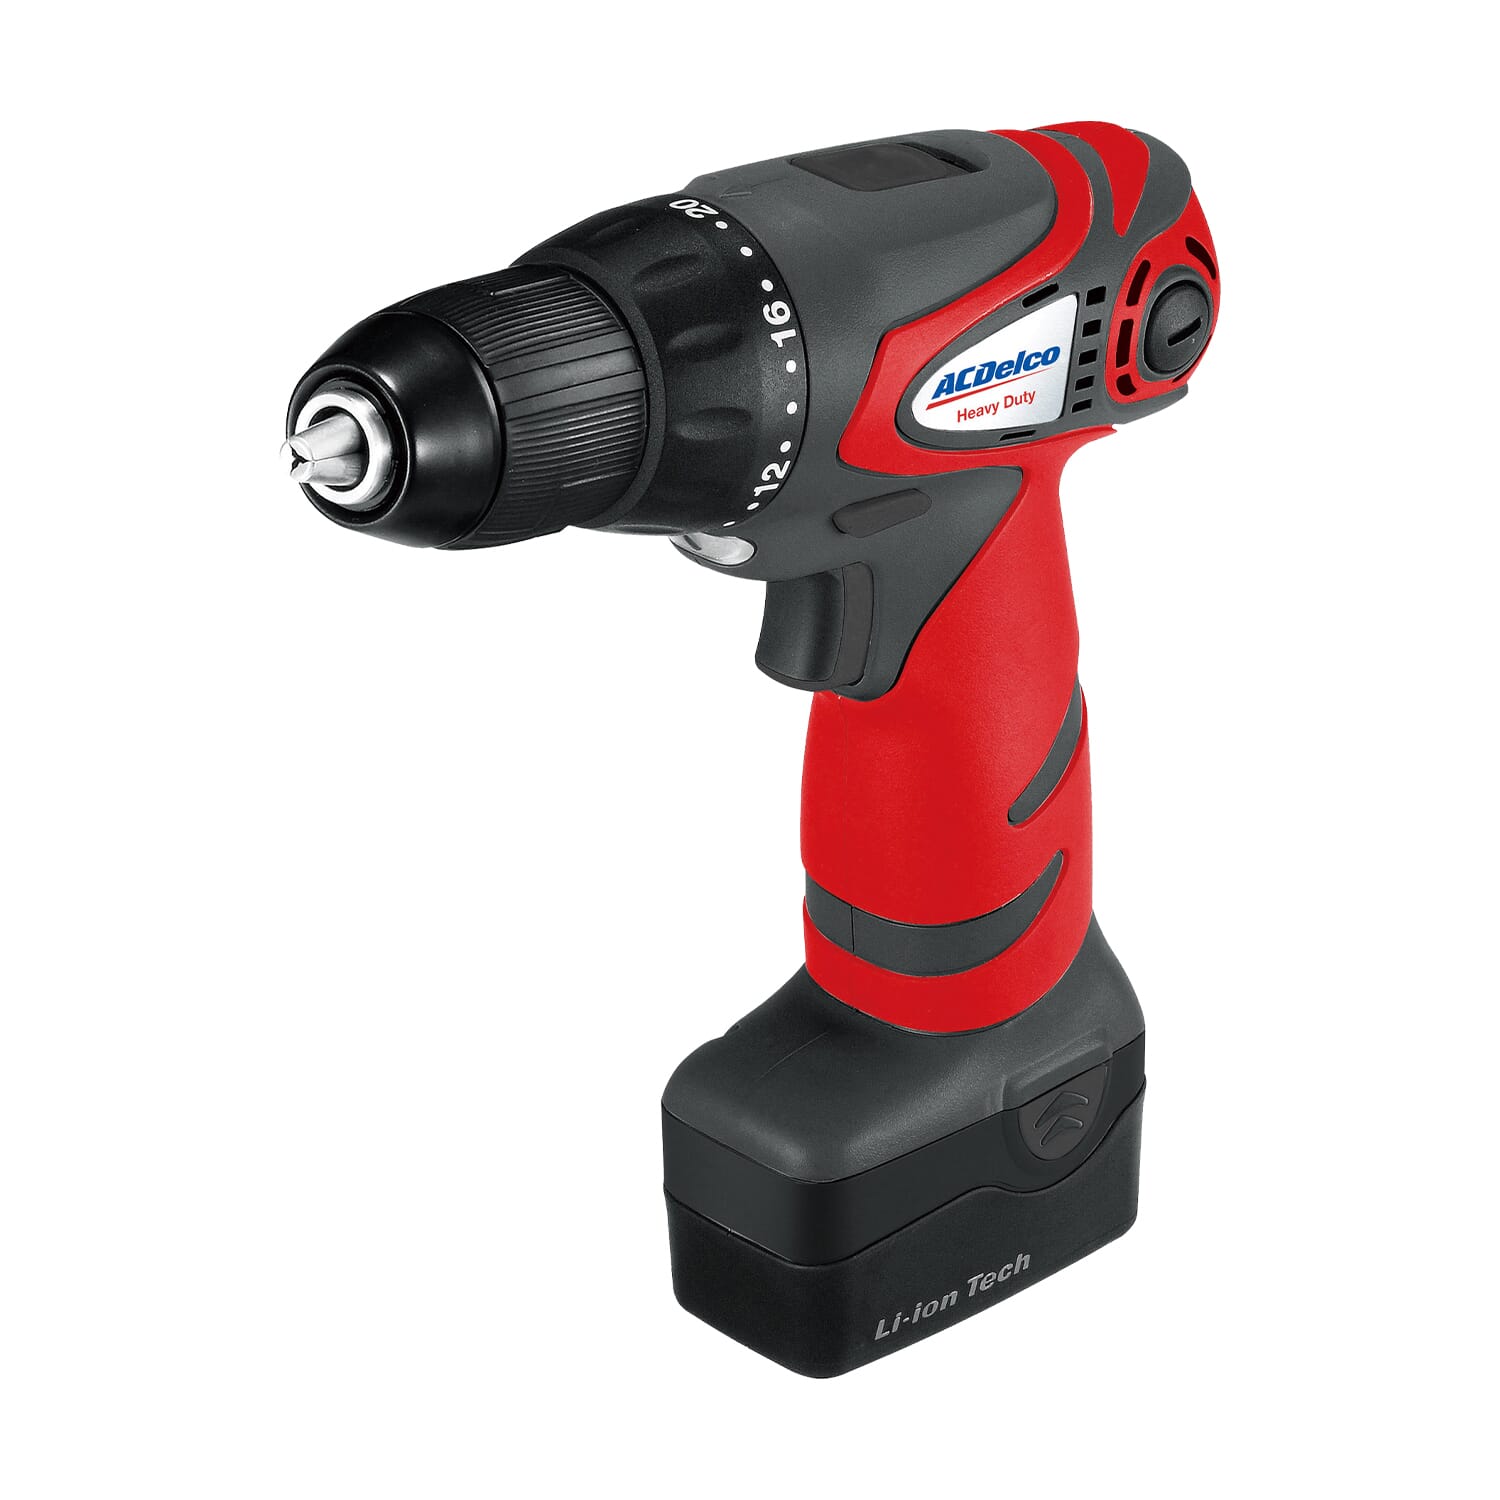 ARD2095H Lithium-Ion 20V 13mm 2-Speed Drill / Driver Power Tool - Tool Only